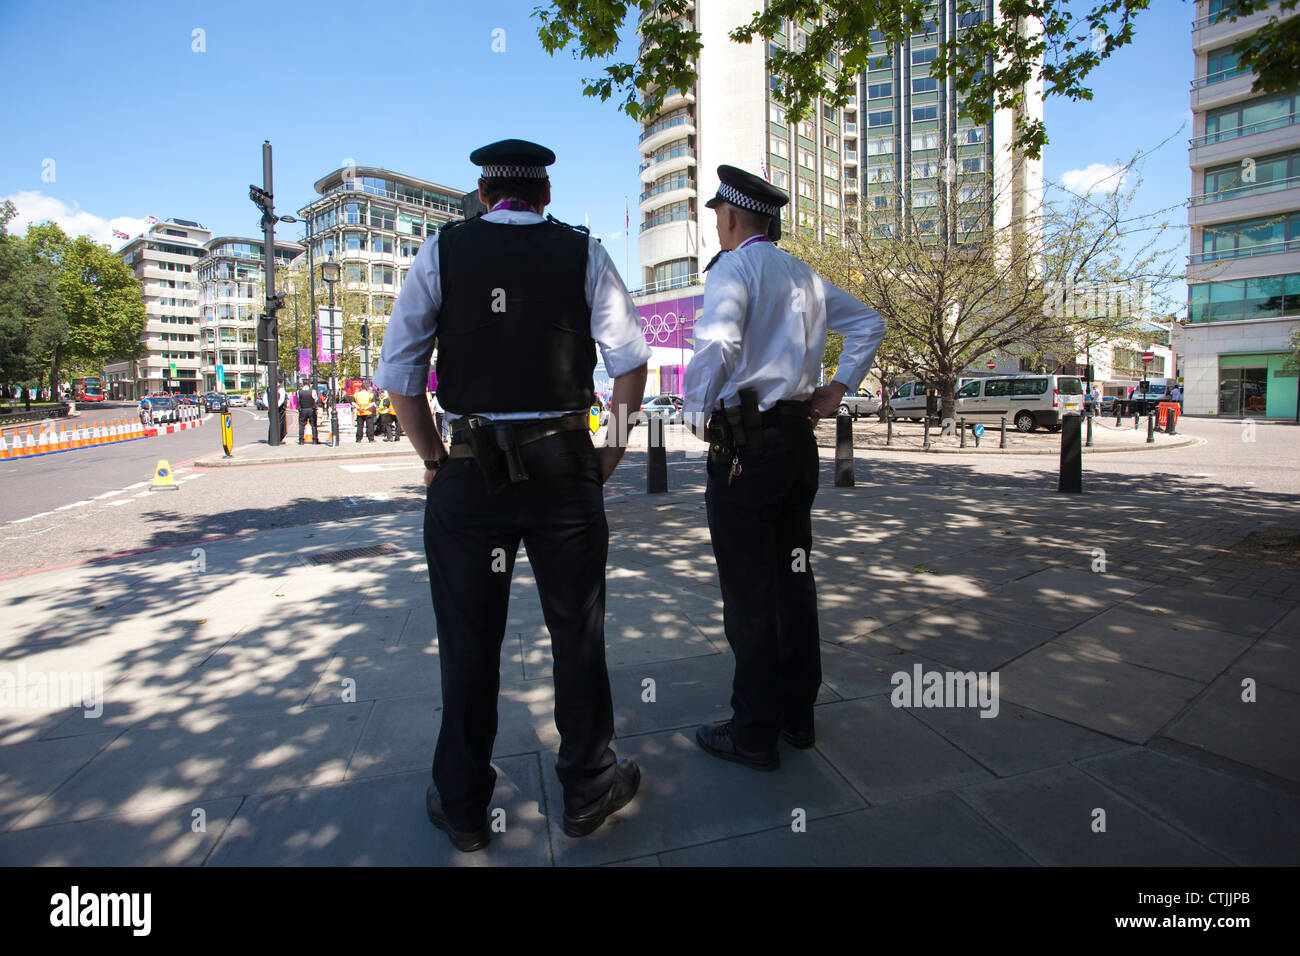 Olympic security surrounding the Hilton on Park Lane London, where the International Olympic Committee stay during the Olympics Stock Photo